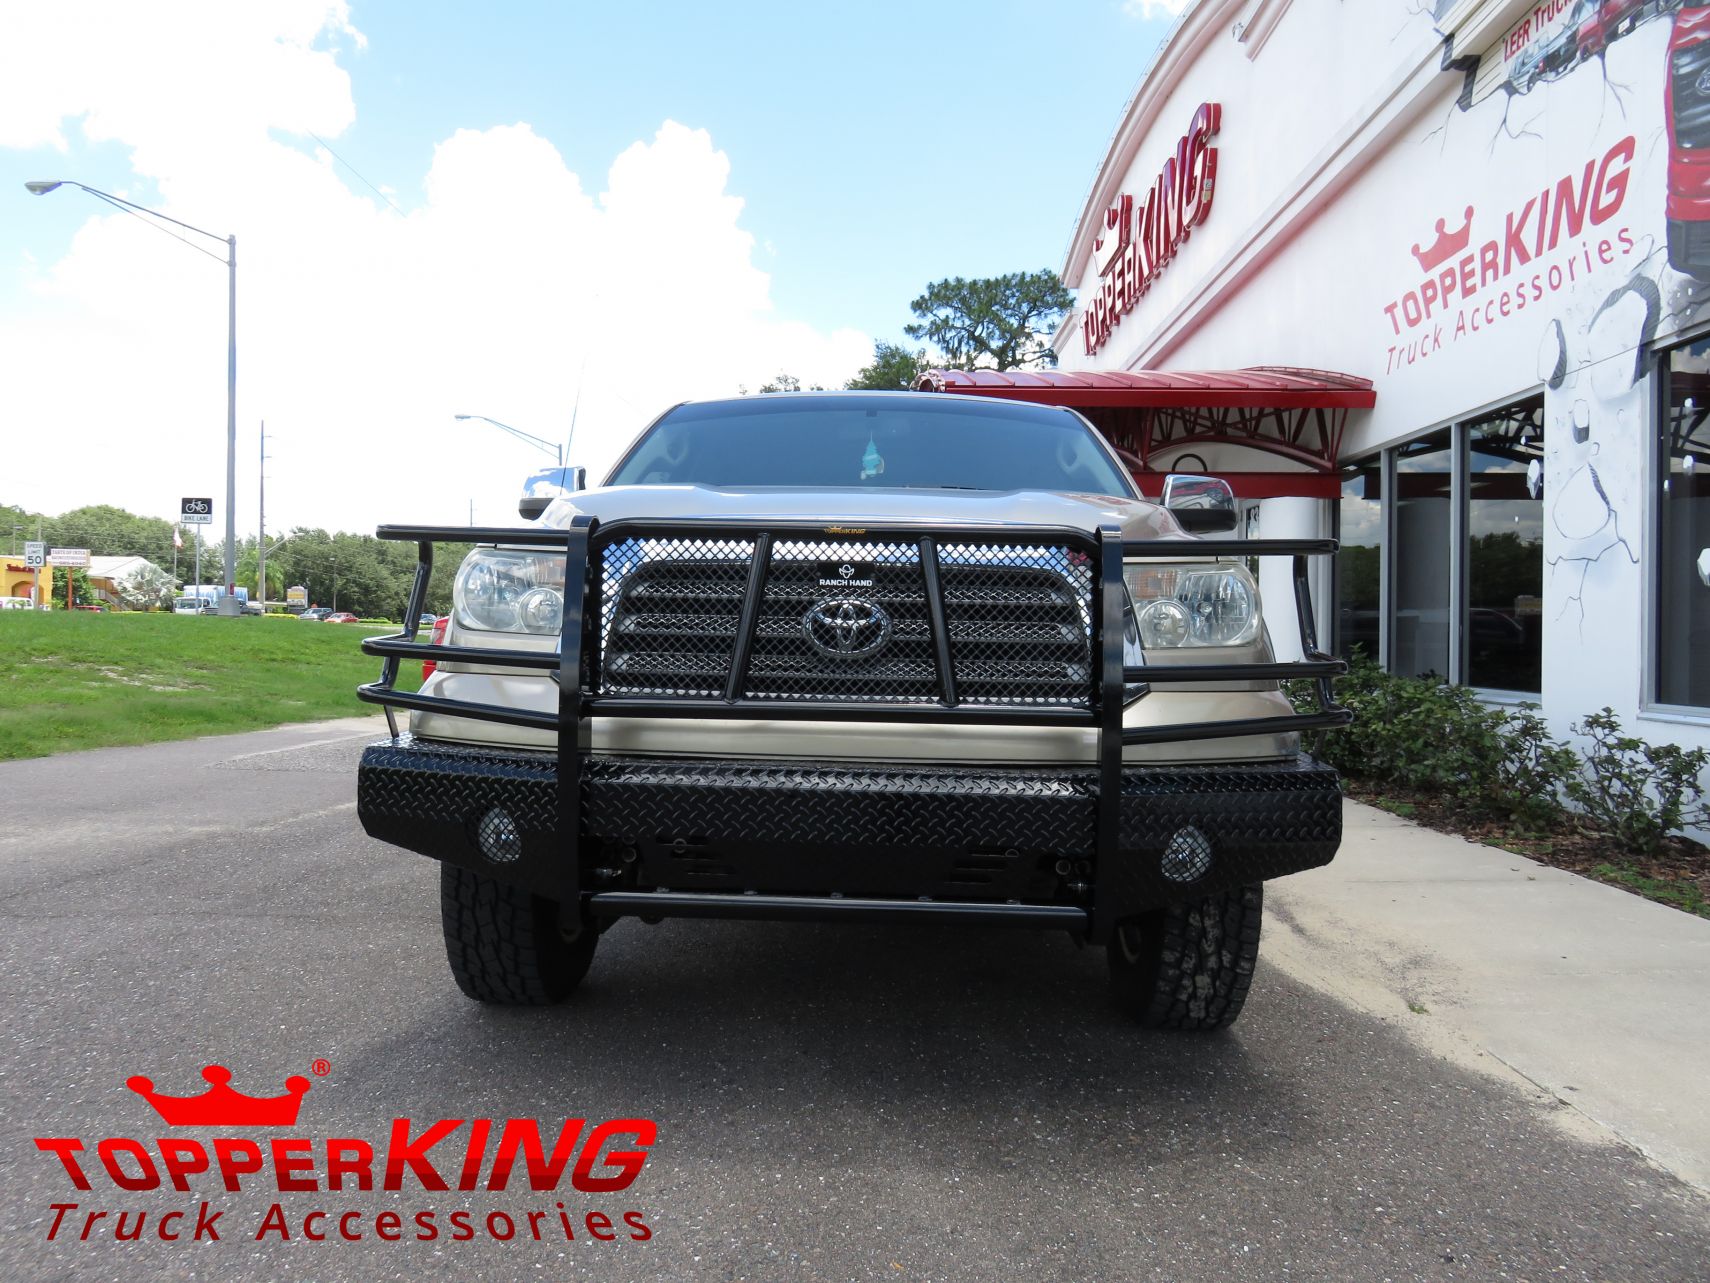 Toyota Tundra RanchHand Bumper and Chrome - TopperKING : TopperKING